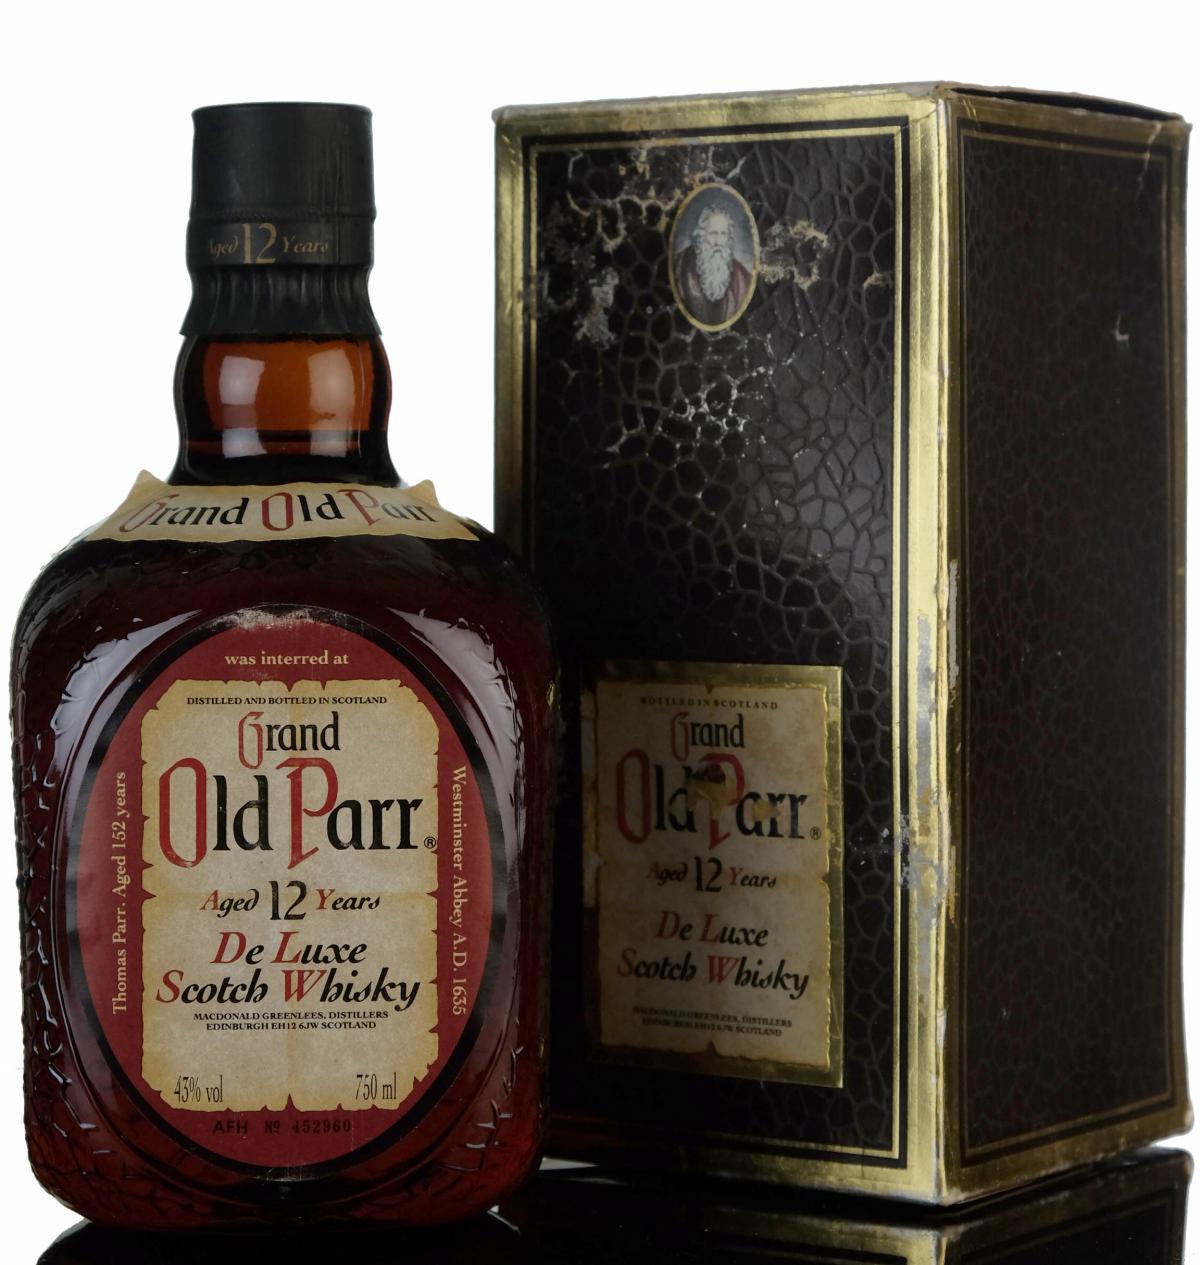 Grand Old Parr 12 Year Old - 1980s